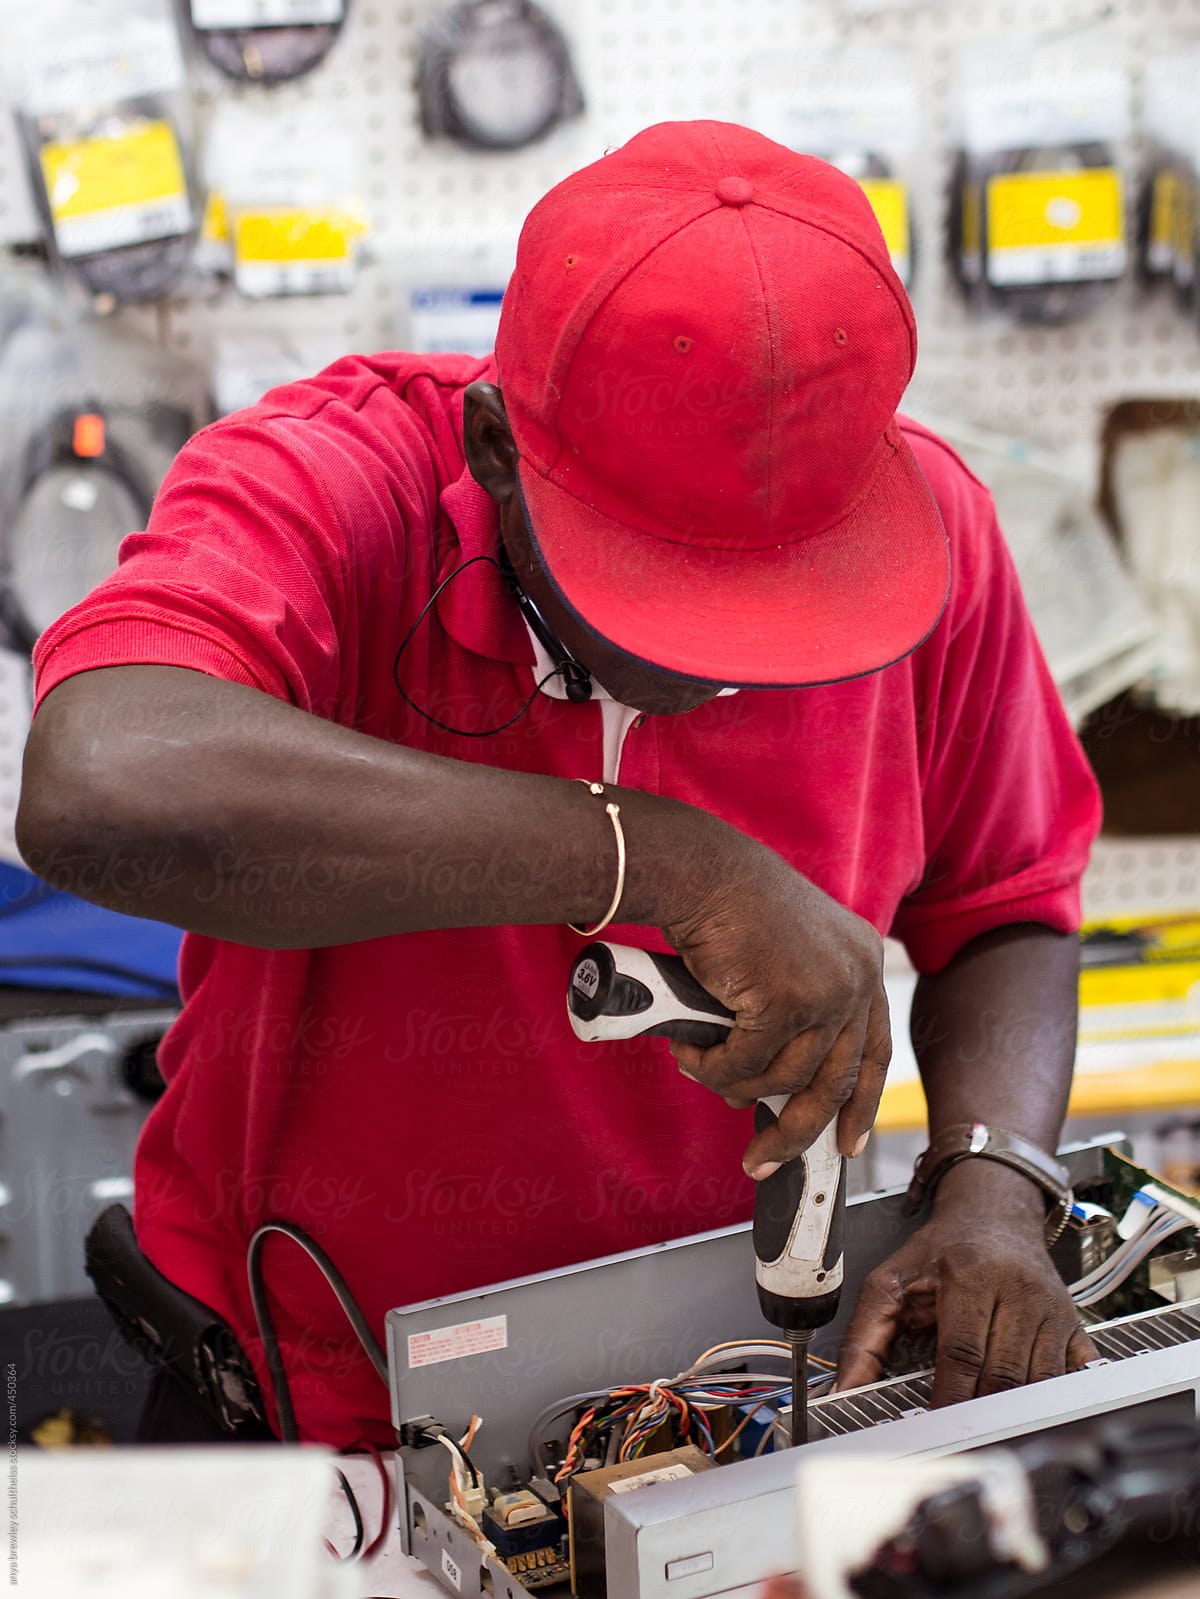 Male technician working on electrical equipment